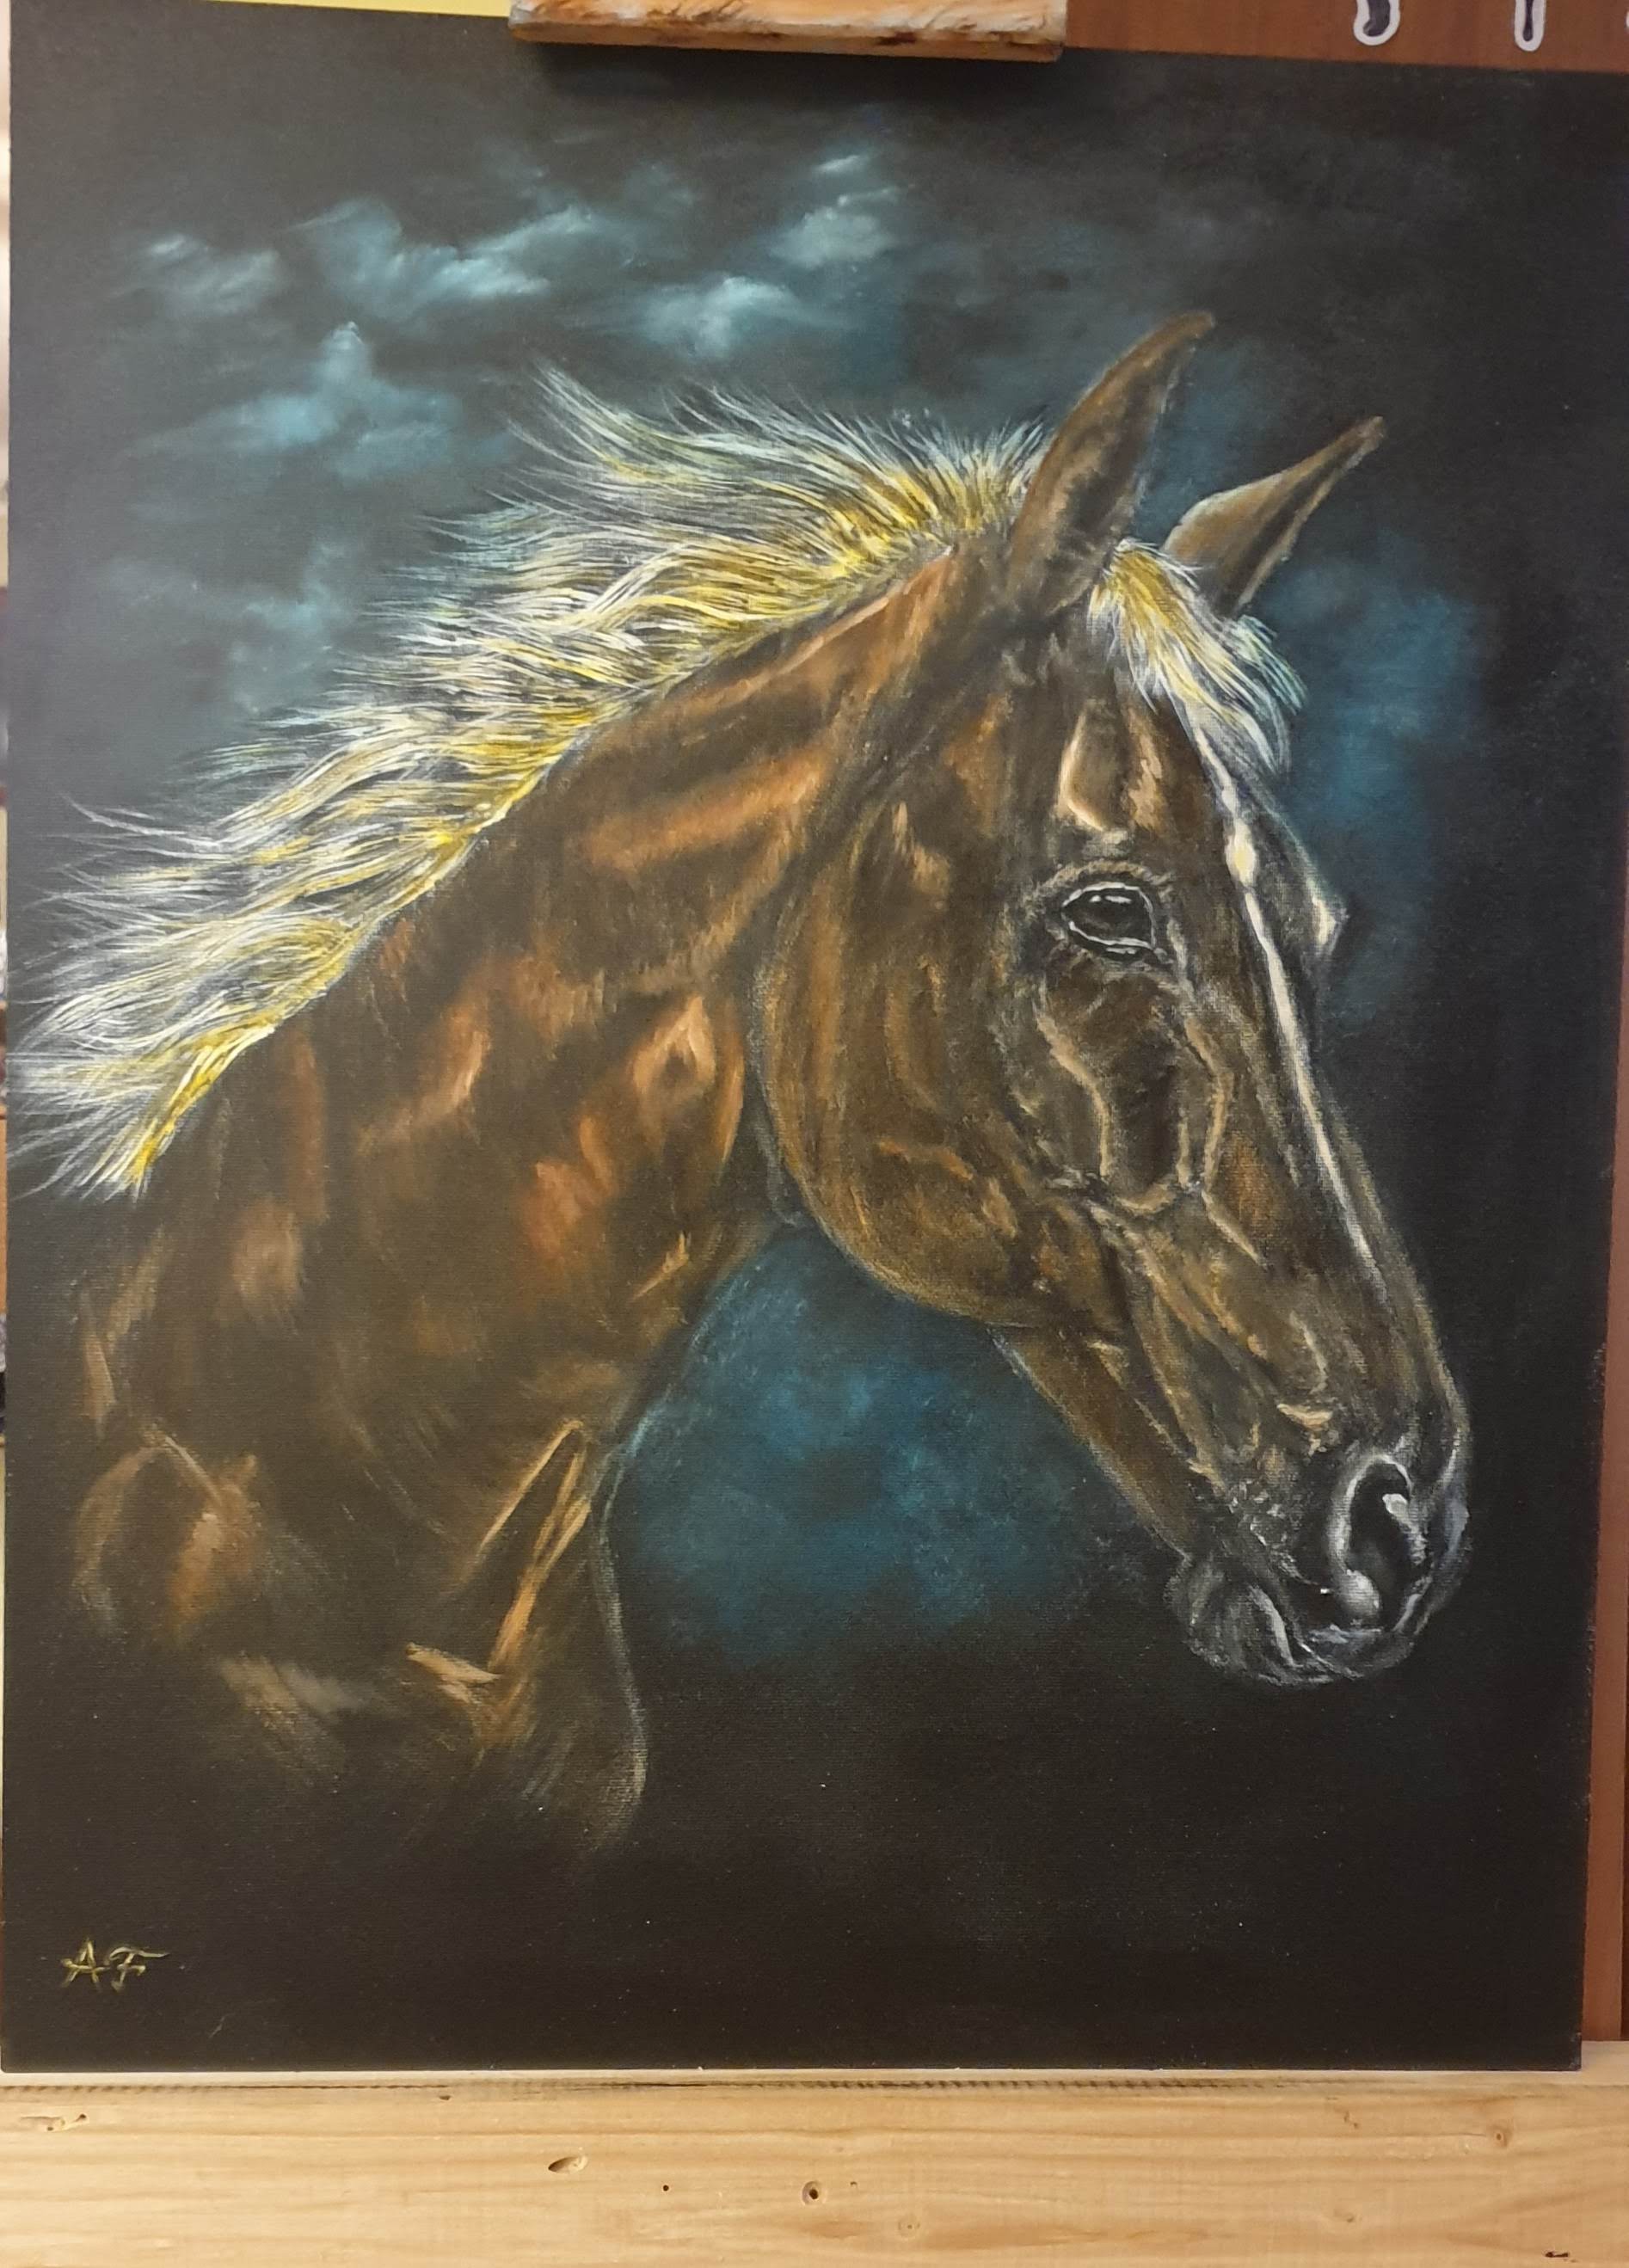 The horse with golded mane in the dark night.